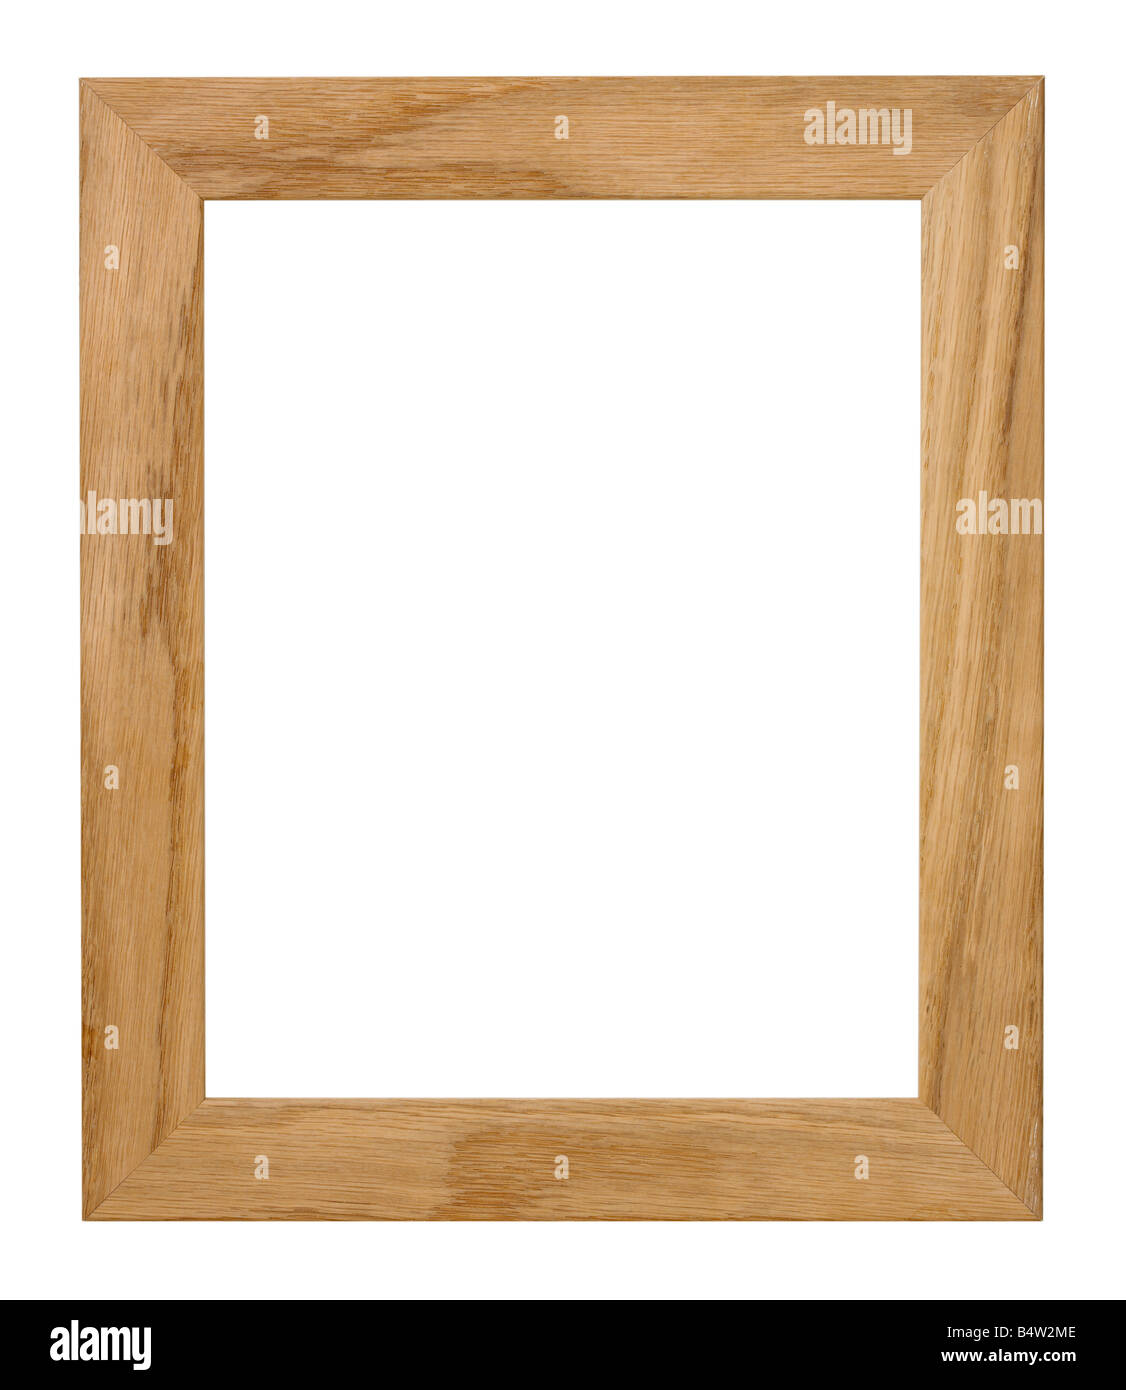 WOOD PICTURE FRAME Stock Photo